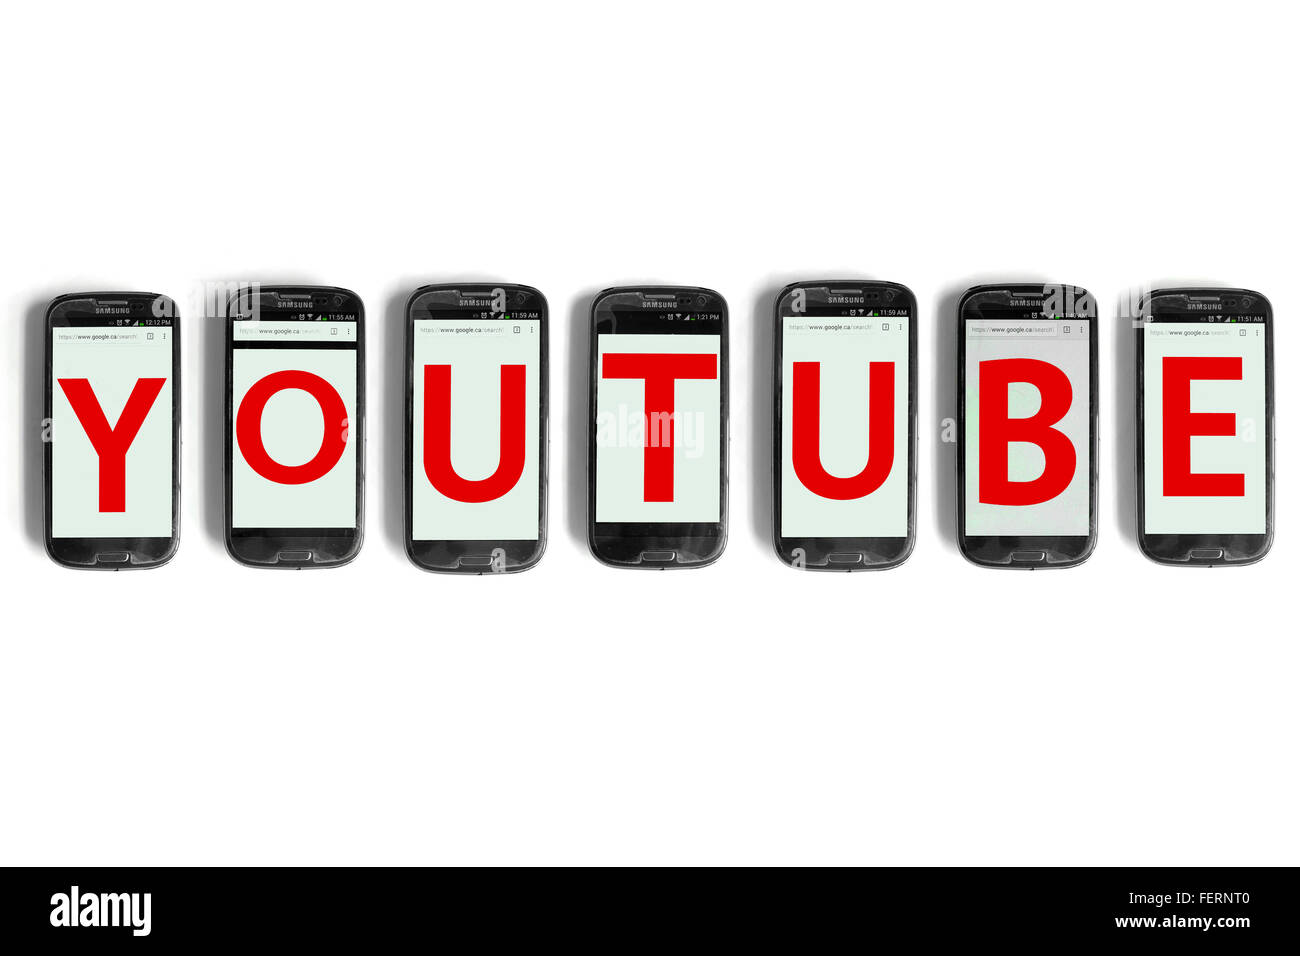 Youtube on the screens of smartphones photographed against a white background. Stock Photo